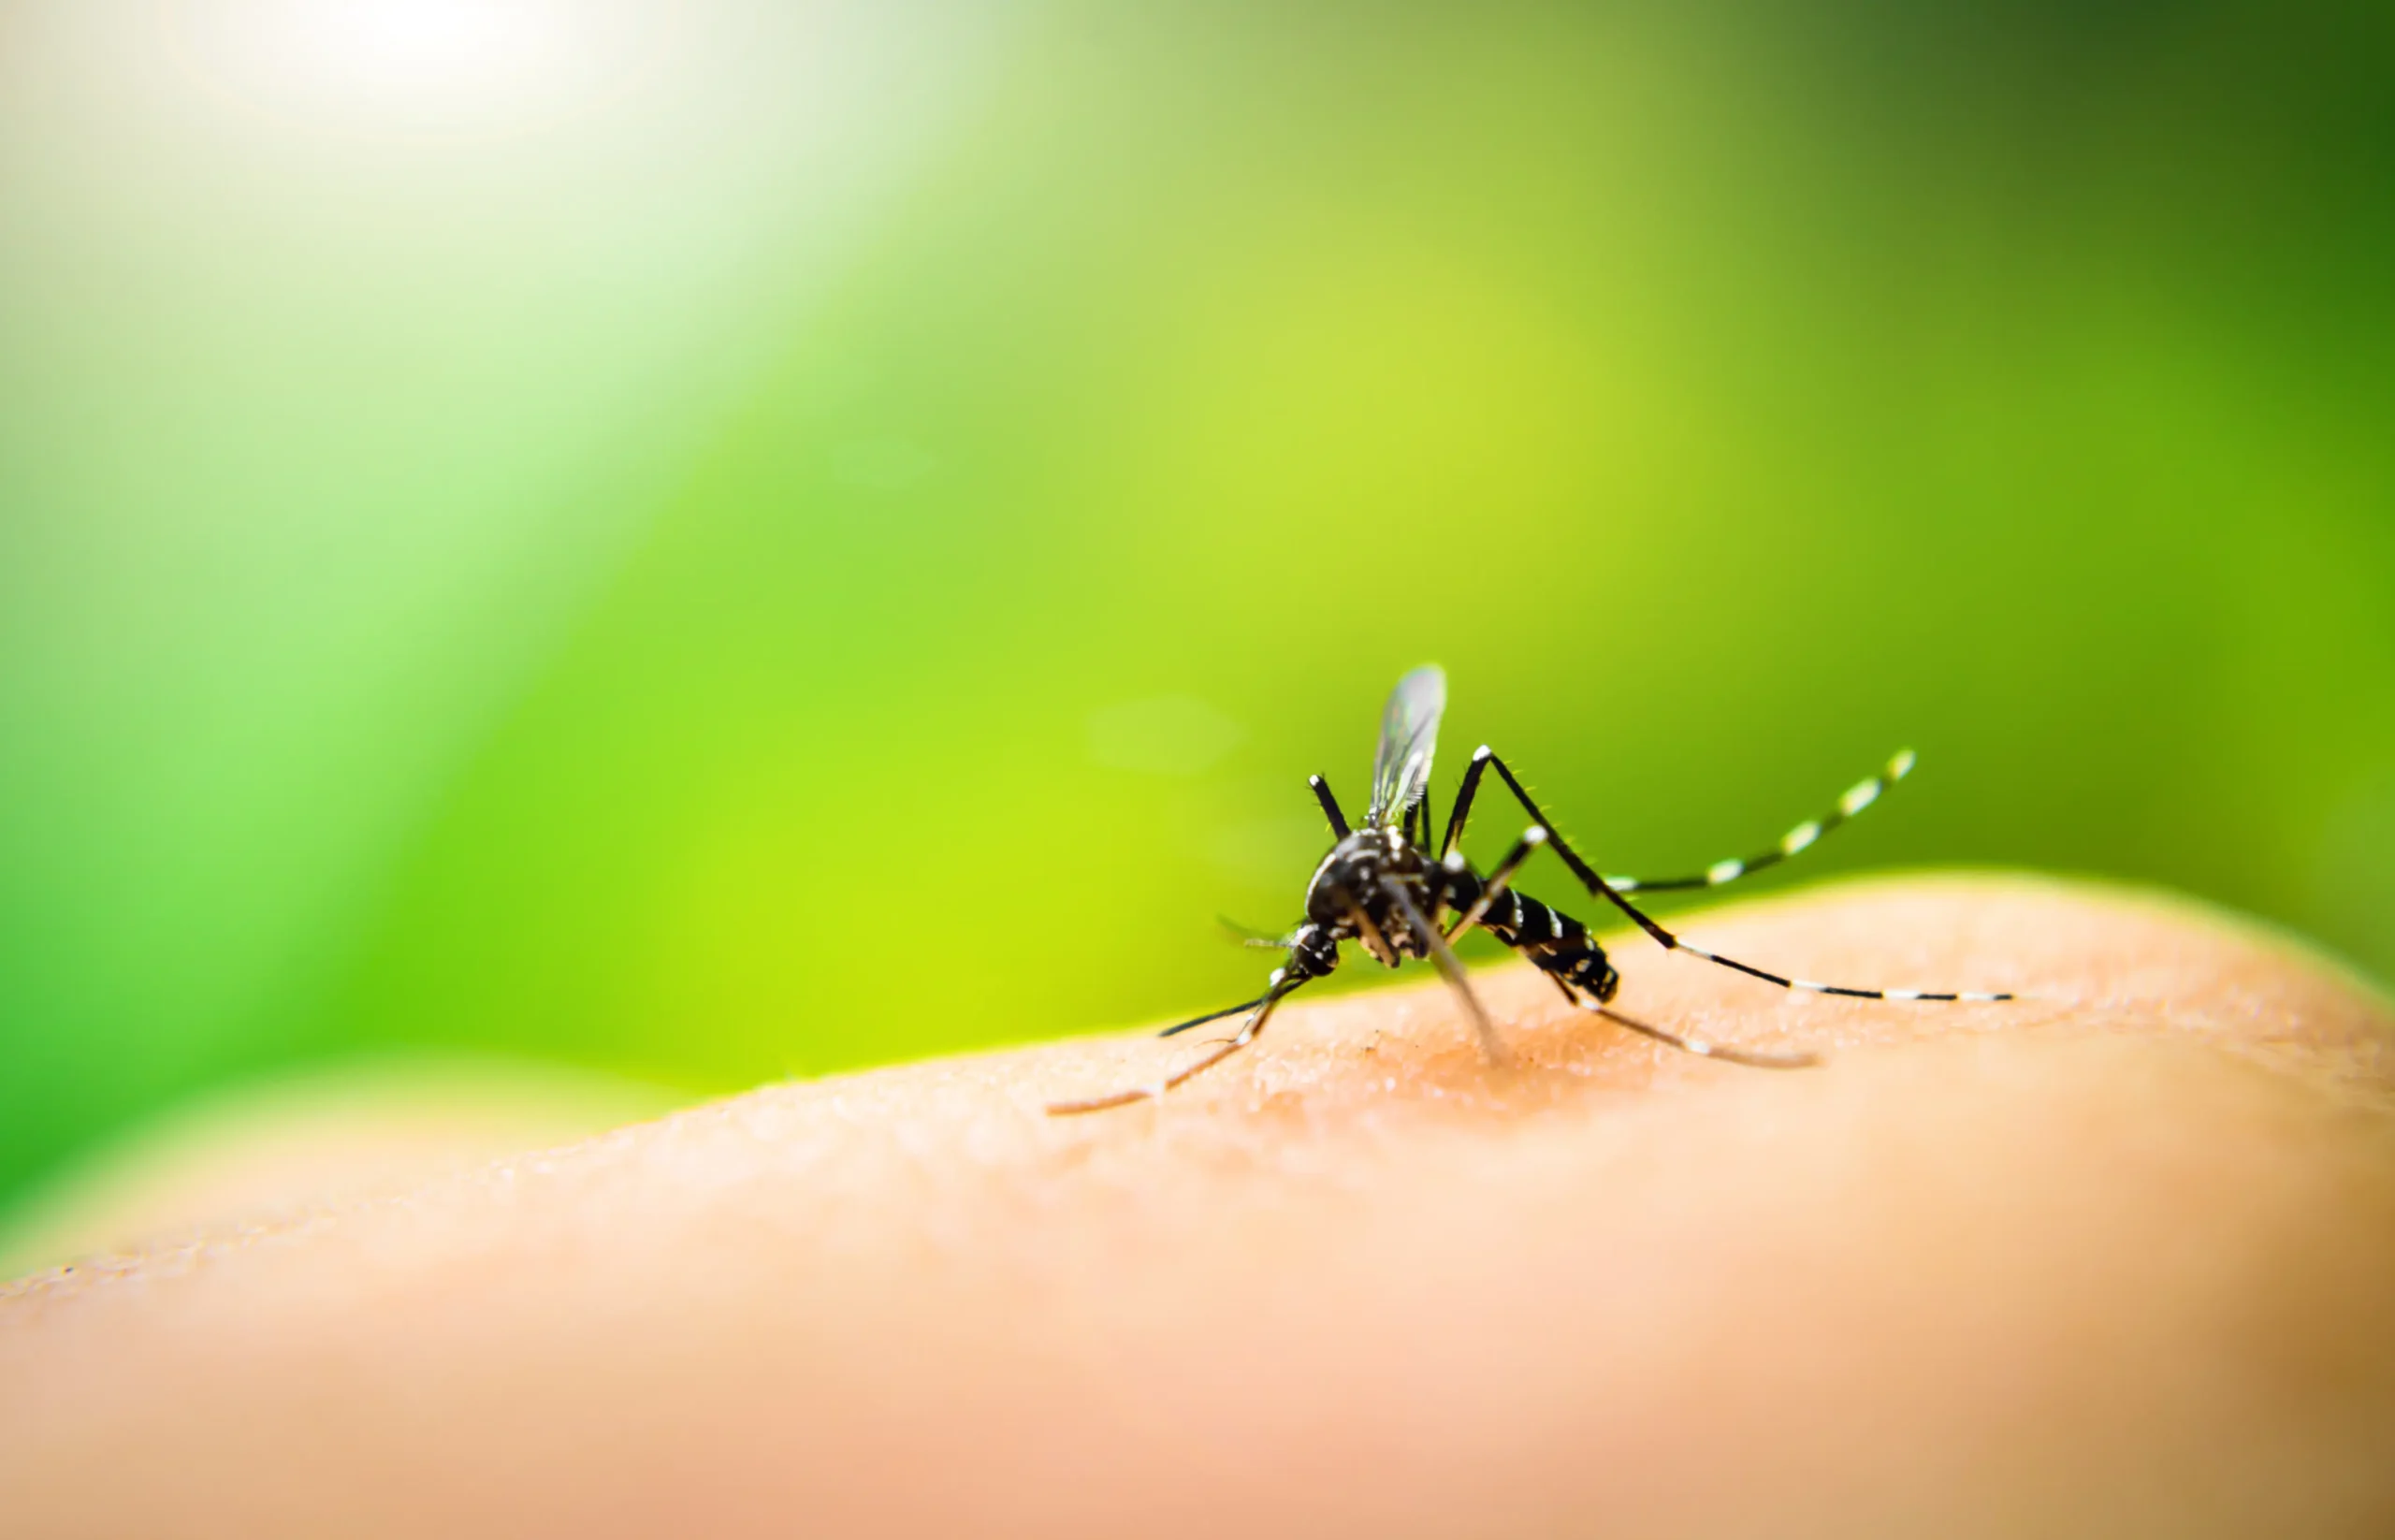 A mosquito on a person's finger - Keep mosquitoes away from your home with Florida Pest Control in Gainesville FL